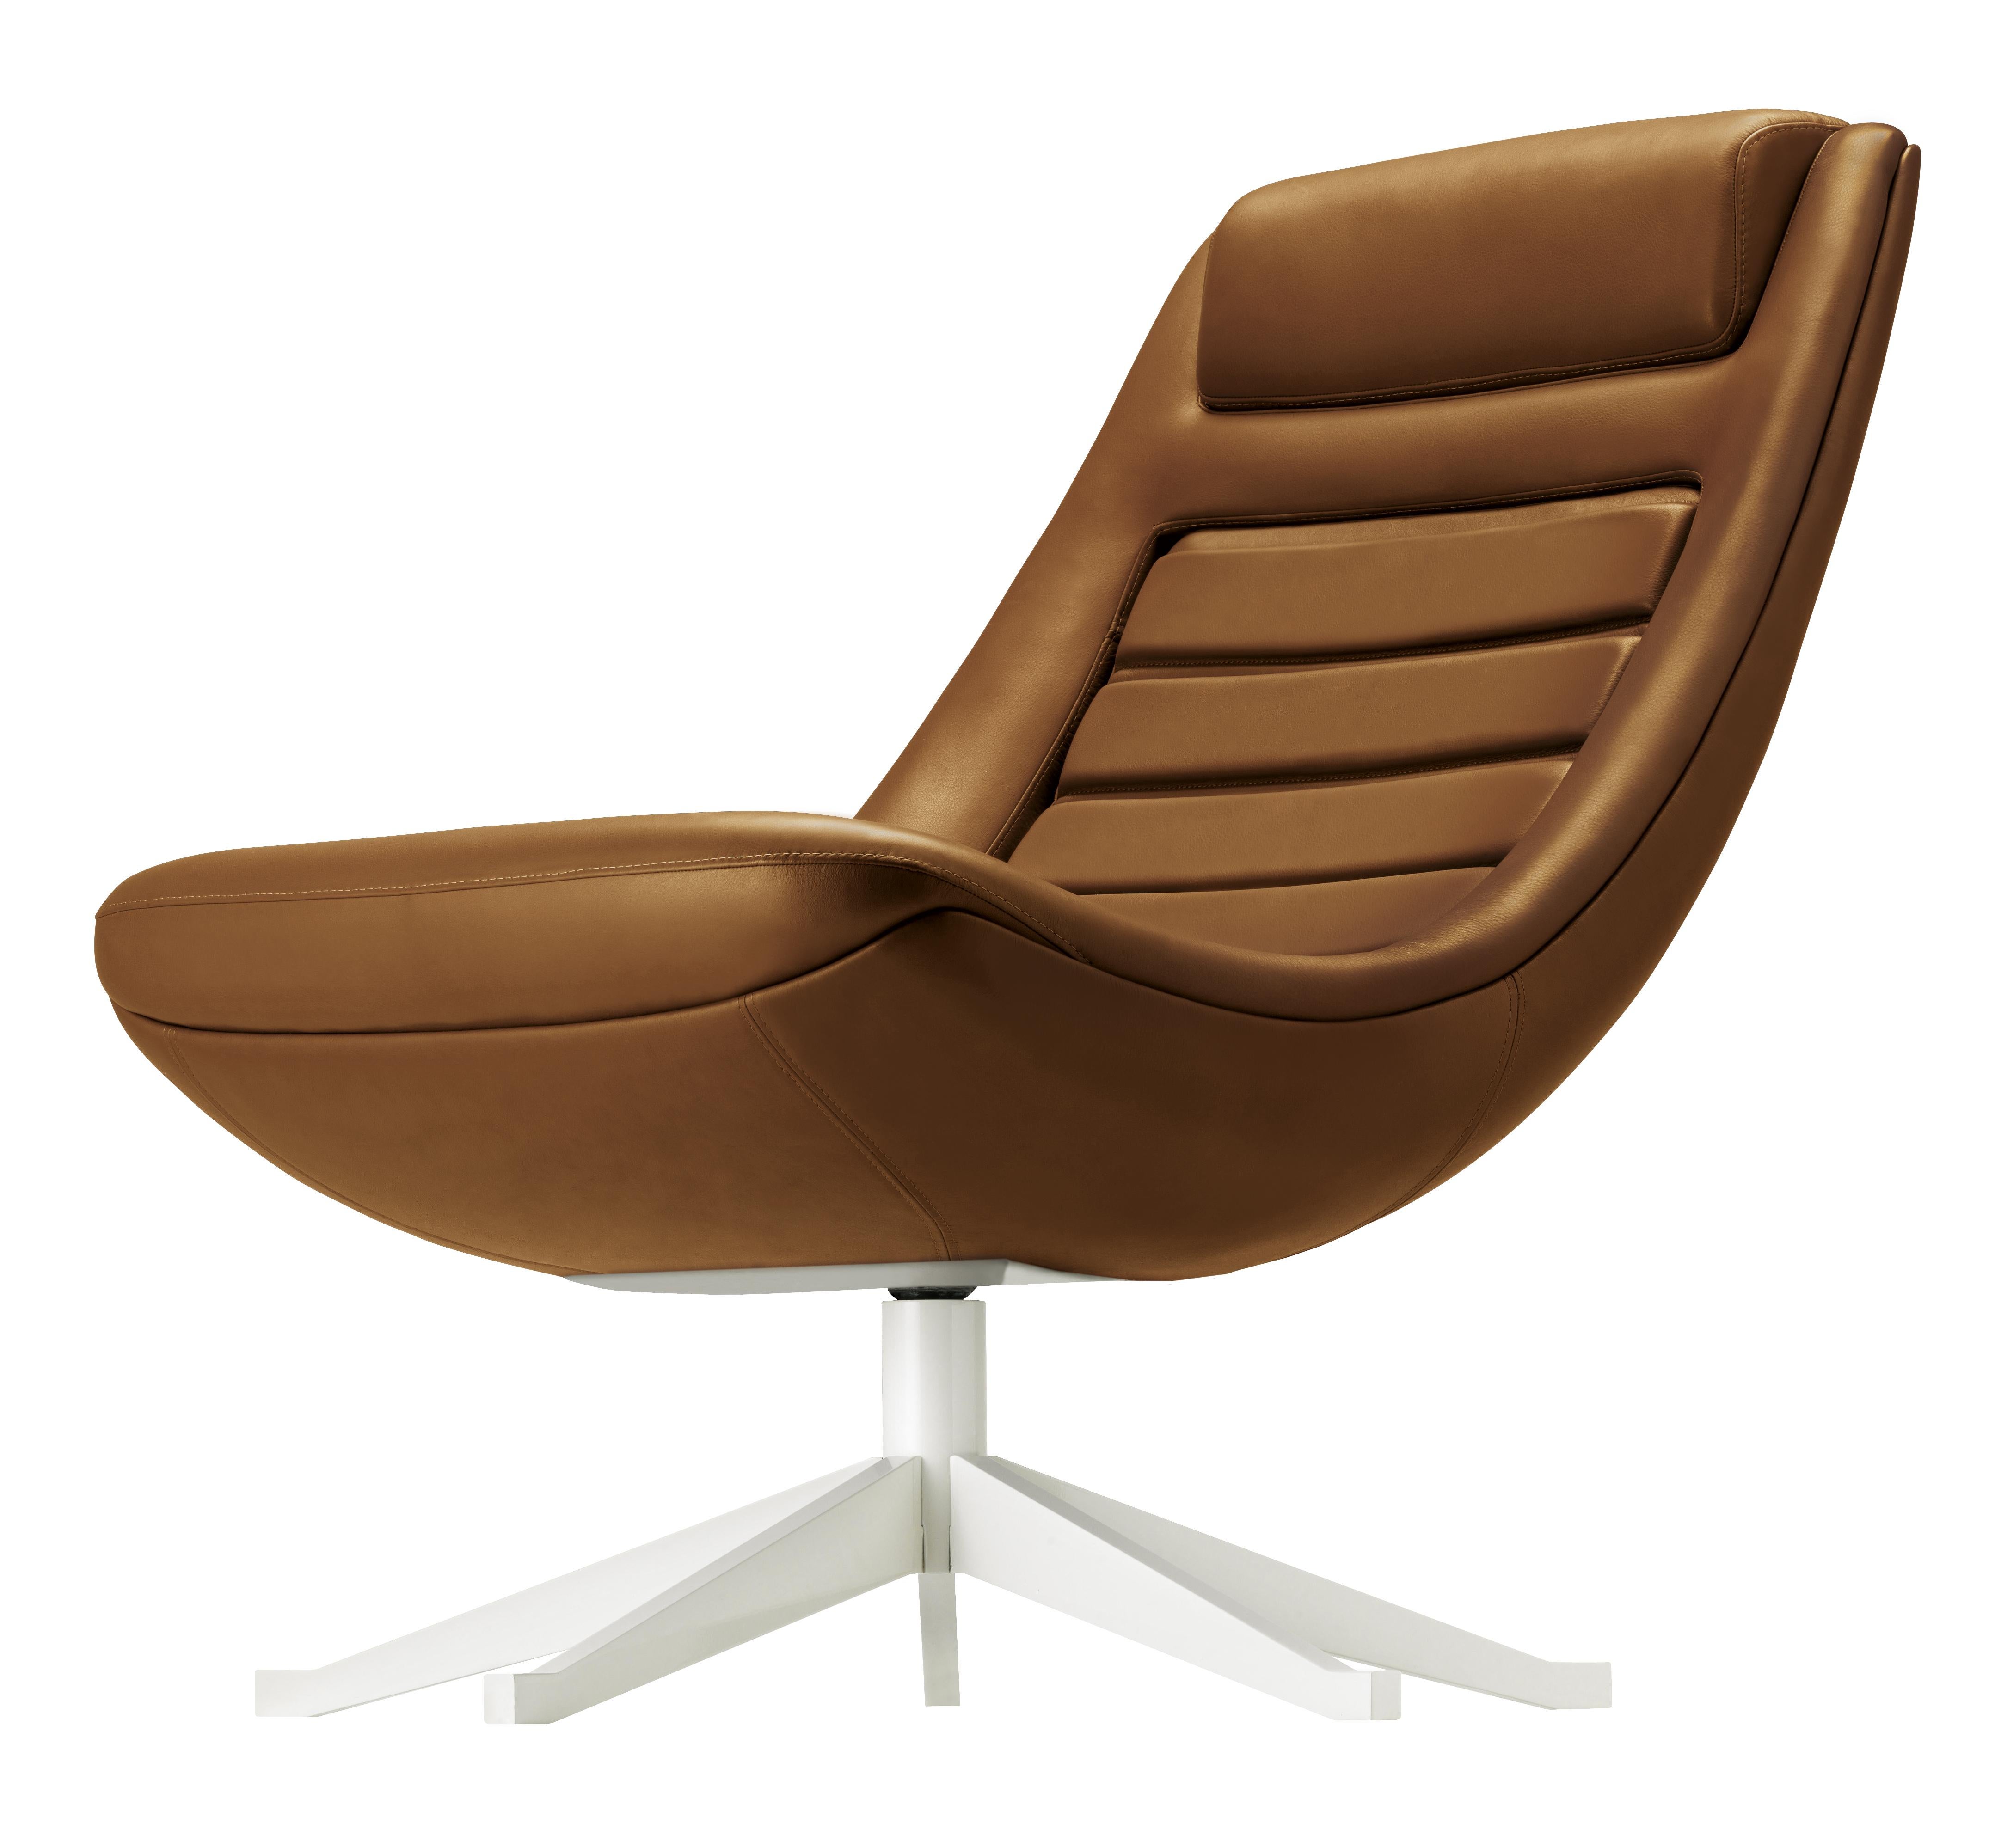 Alias 090 Manzù Lounge Chair in Brown Upholstery with White Lacquered Frame by Pio Manzù

Armchair with seat and back shell in compact polyurethane moulded together with expanded polyurethane, 5-star base in black (A009) lacquered die-cast